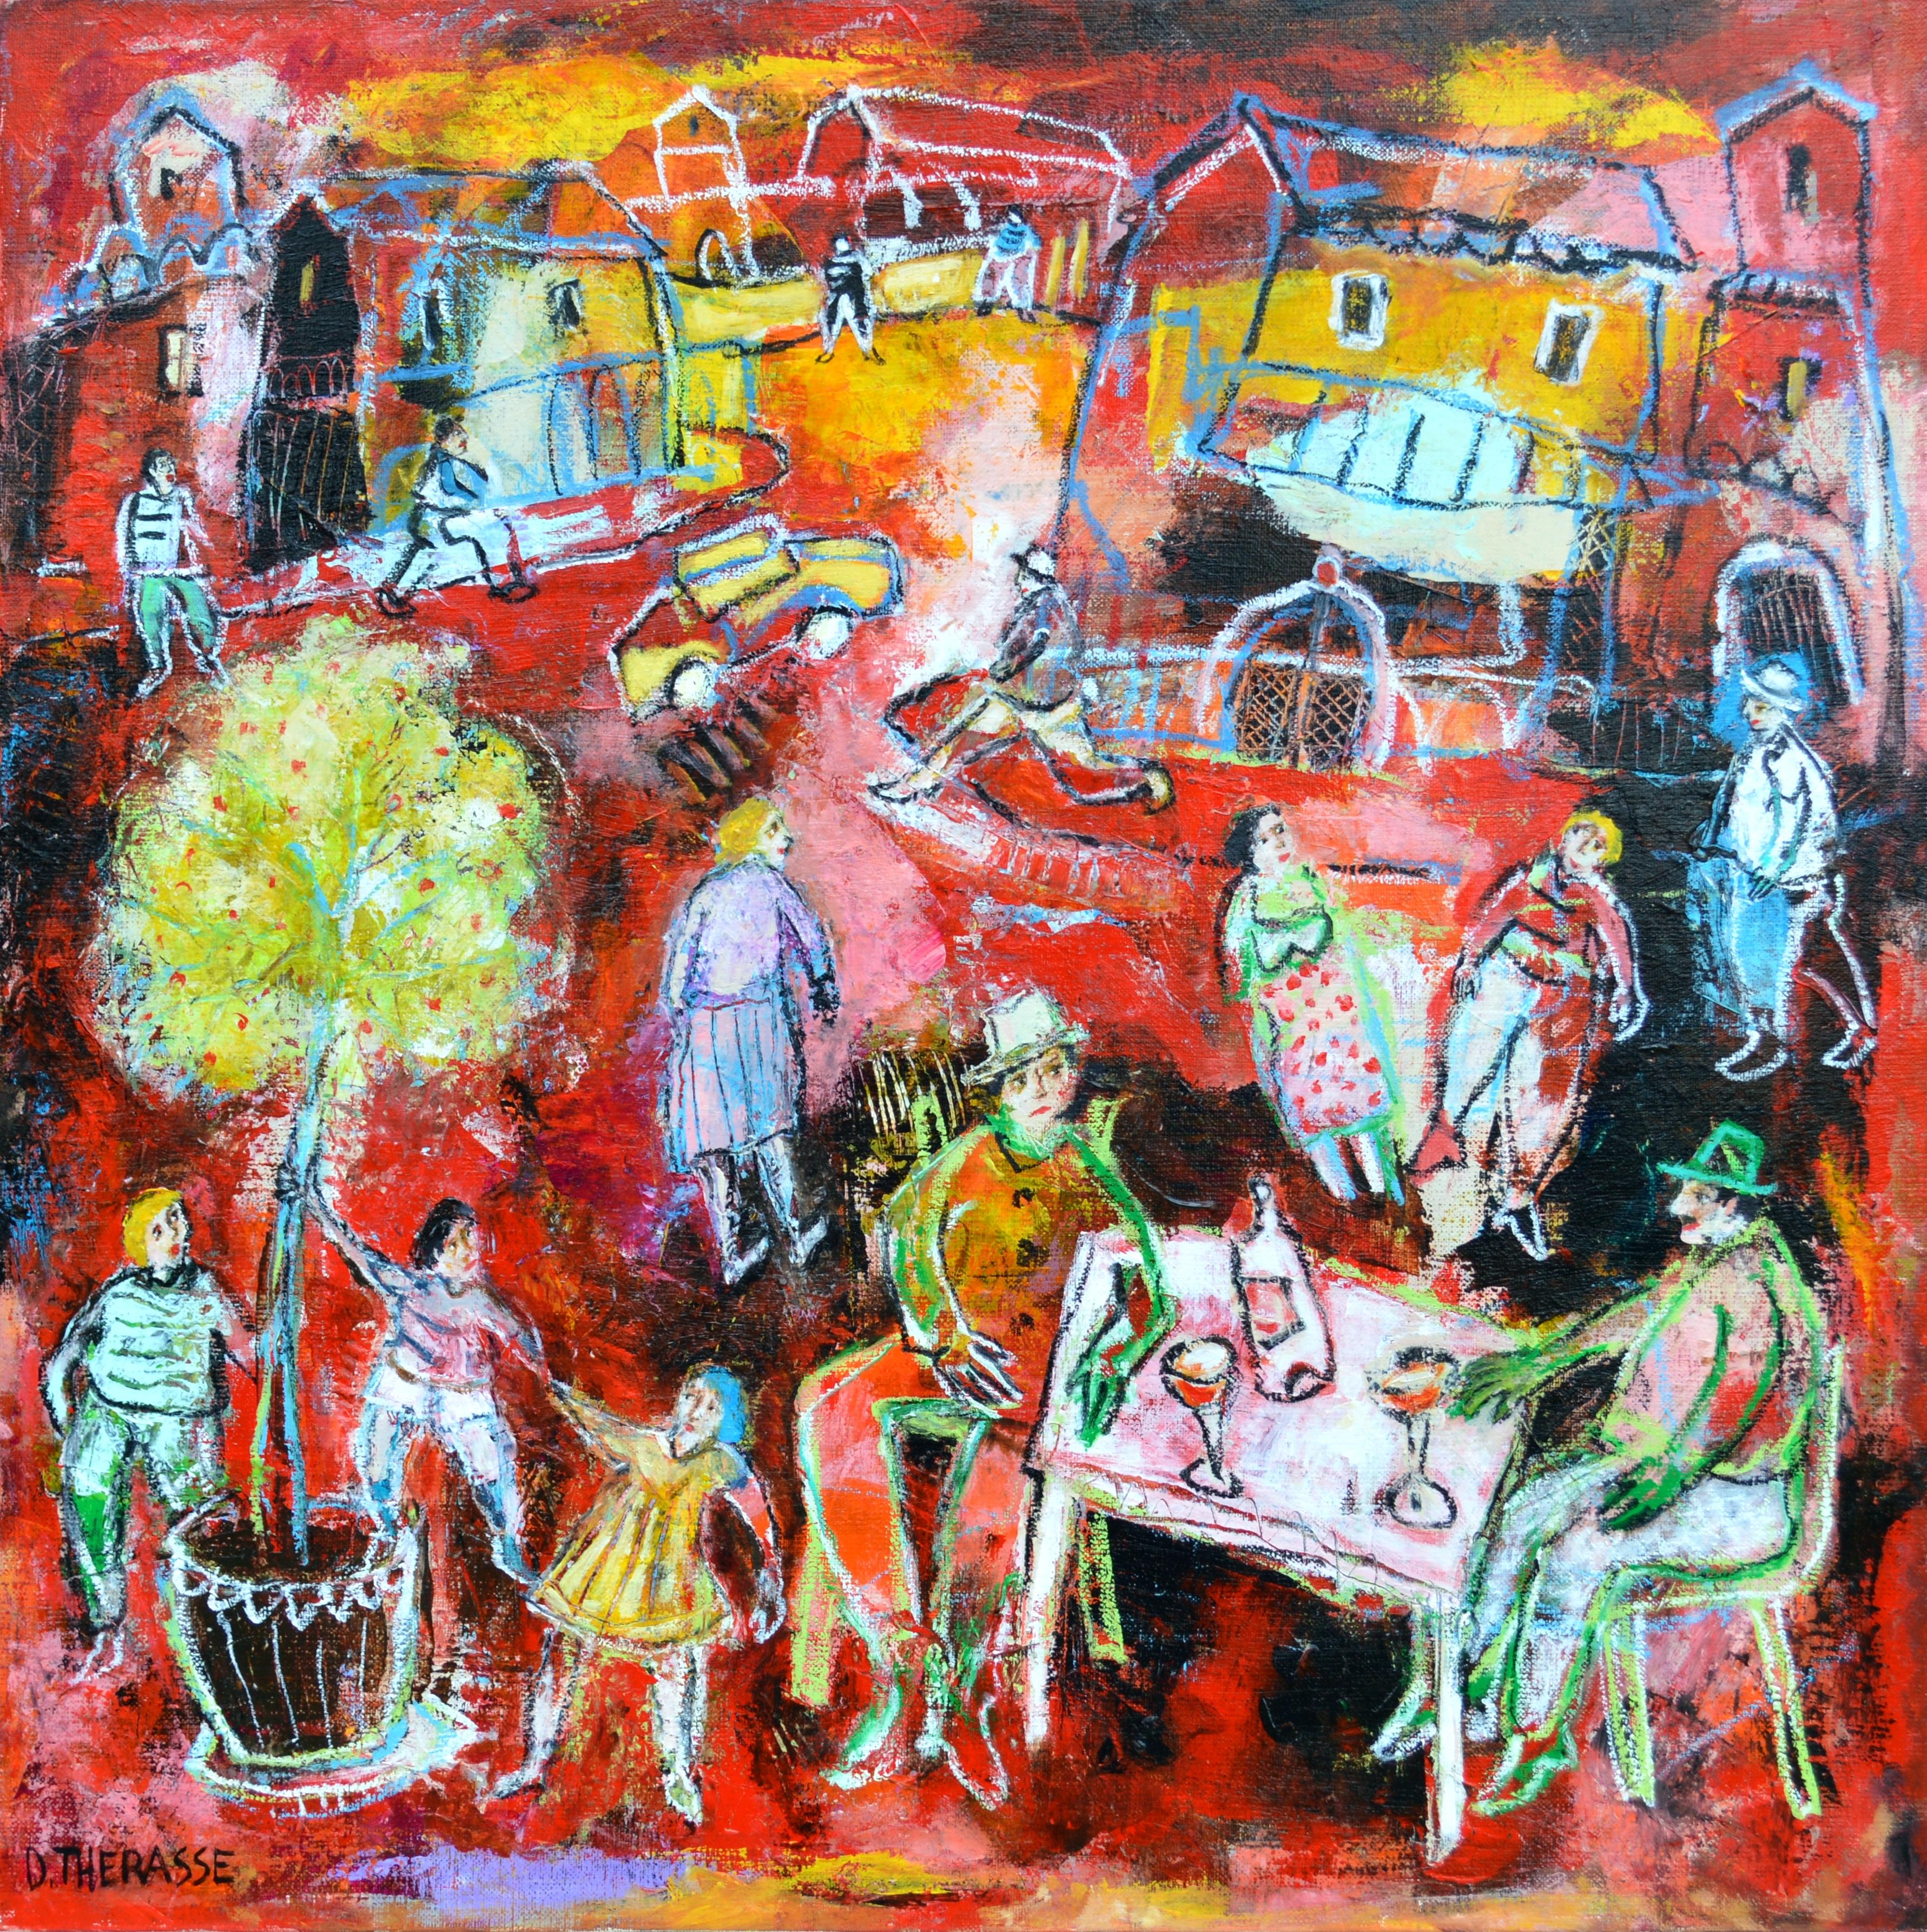 "Two Friends & Passersby",  People in Groups Red Yellow Figuration Painting  - Mixed Media Art by Daniel Thérasse